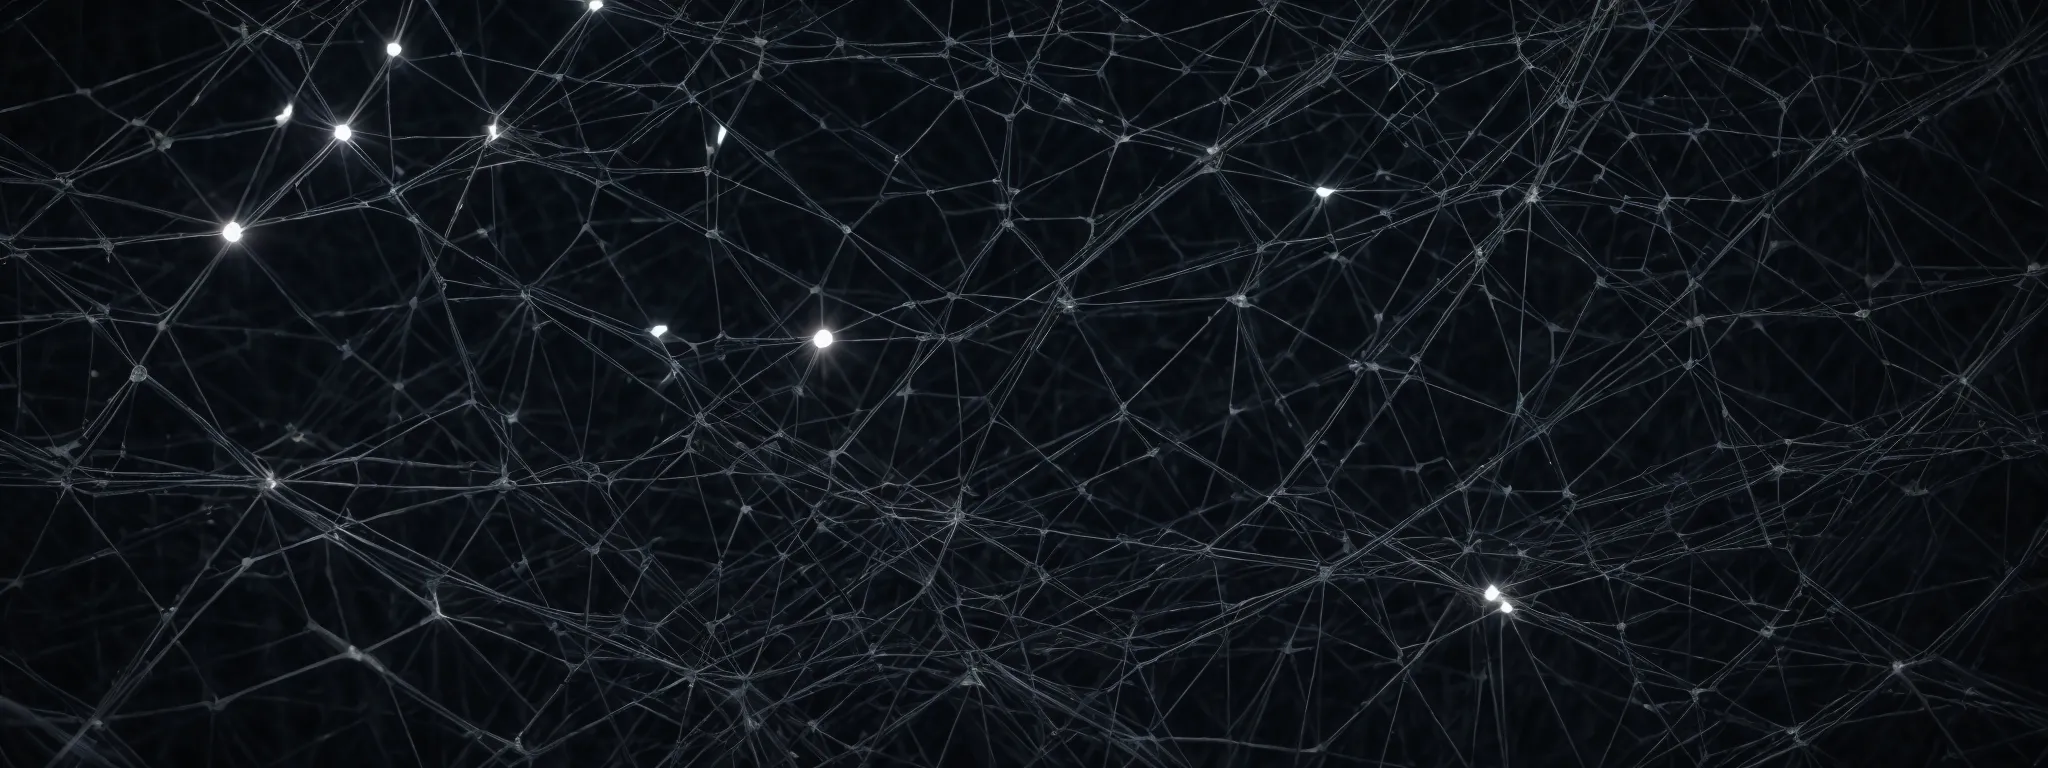 a web of interconnected nodes representing a network of links highlights the essence of seo's link-building strategy.